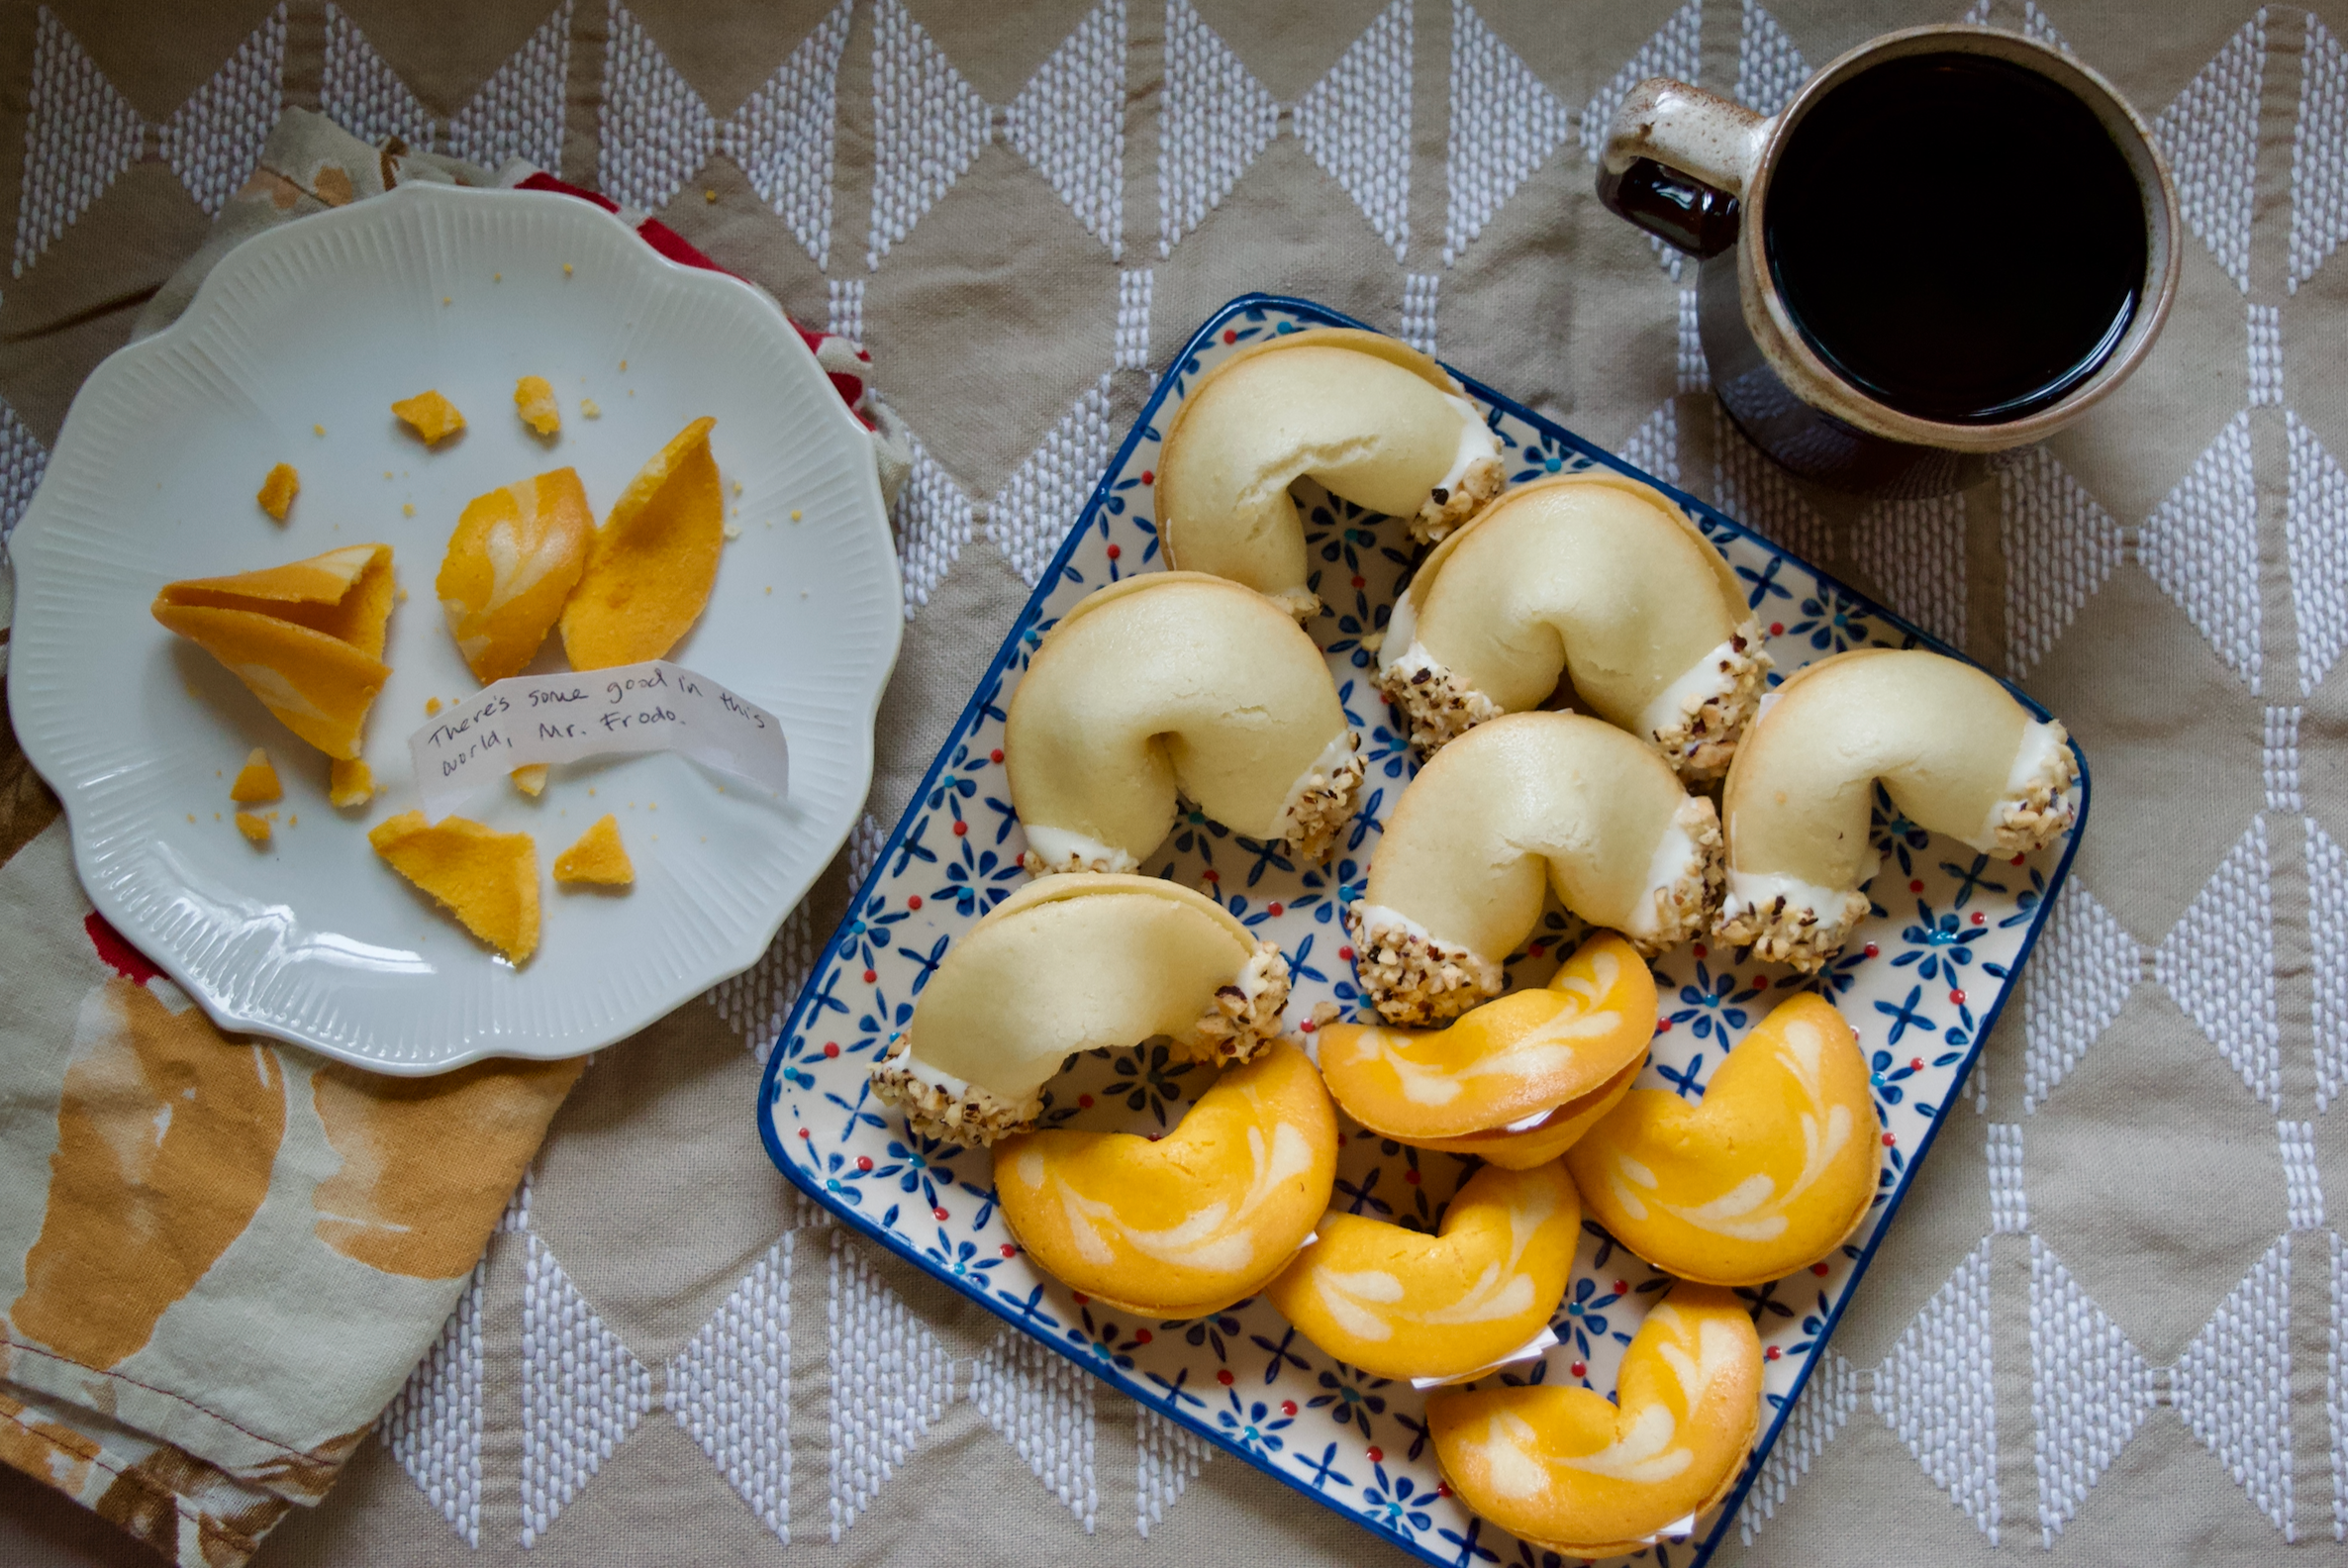 A plate of fortune cookies and a cup of tea.